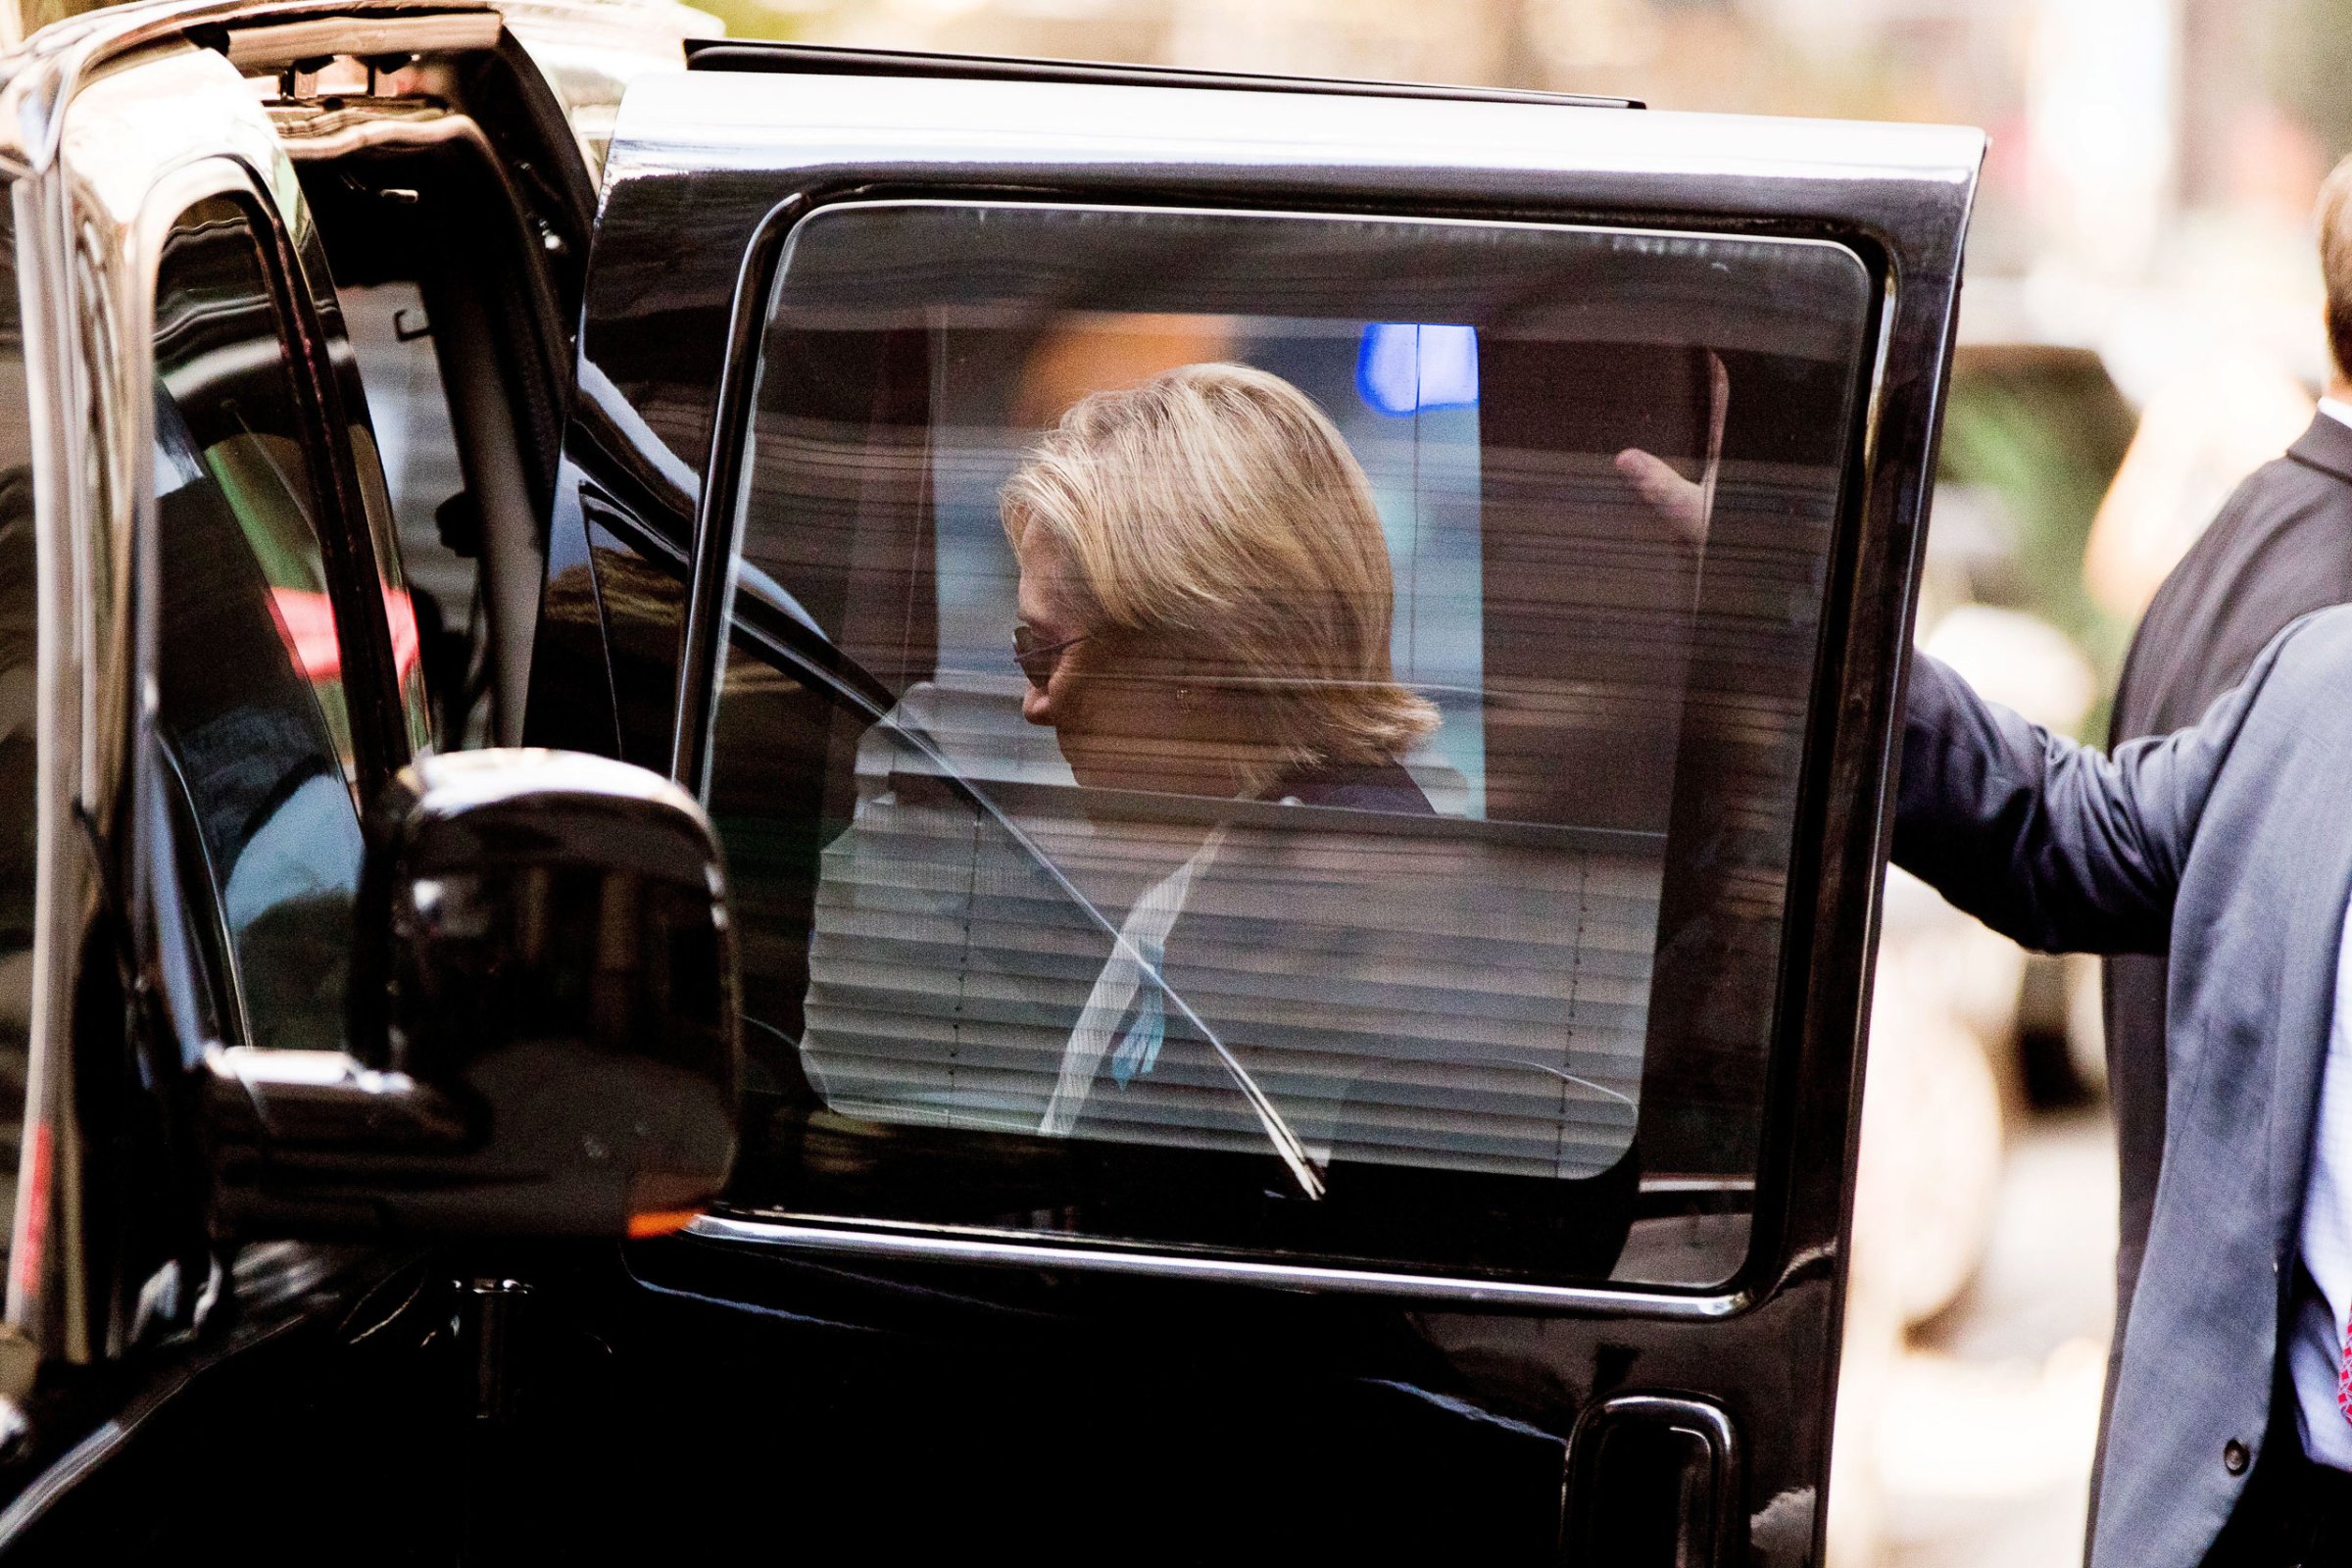 Clinton returns to her motorcade after briefly recuperating at her daughter Chelsea’s apartment